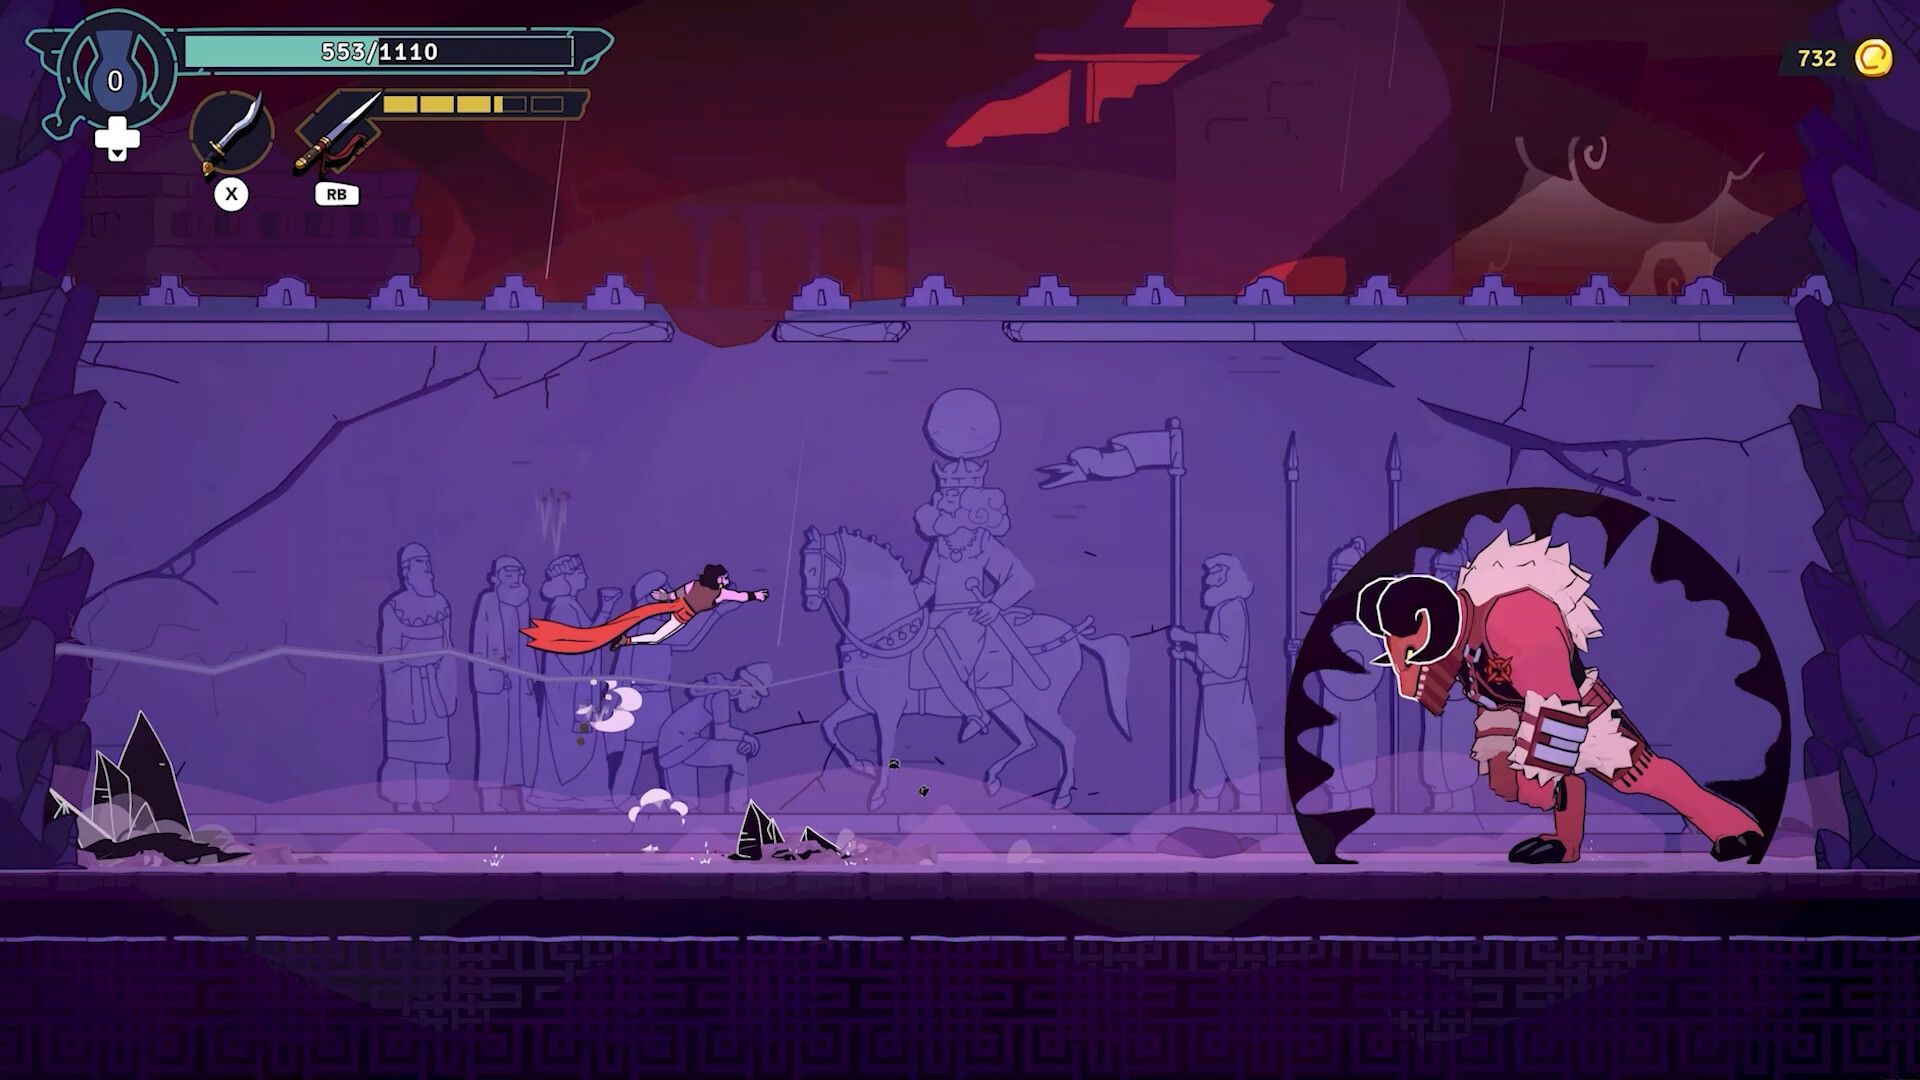 The time-traveling prince, protagonist of The Rogue Prince of Persia, flies across the screen from the left side towards a massive bull-like enemy on the right side of the screen